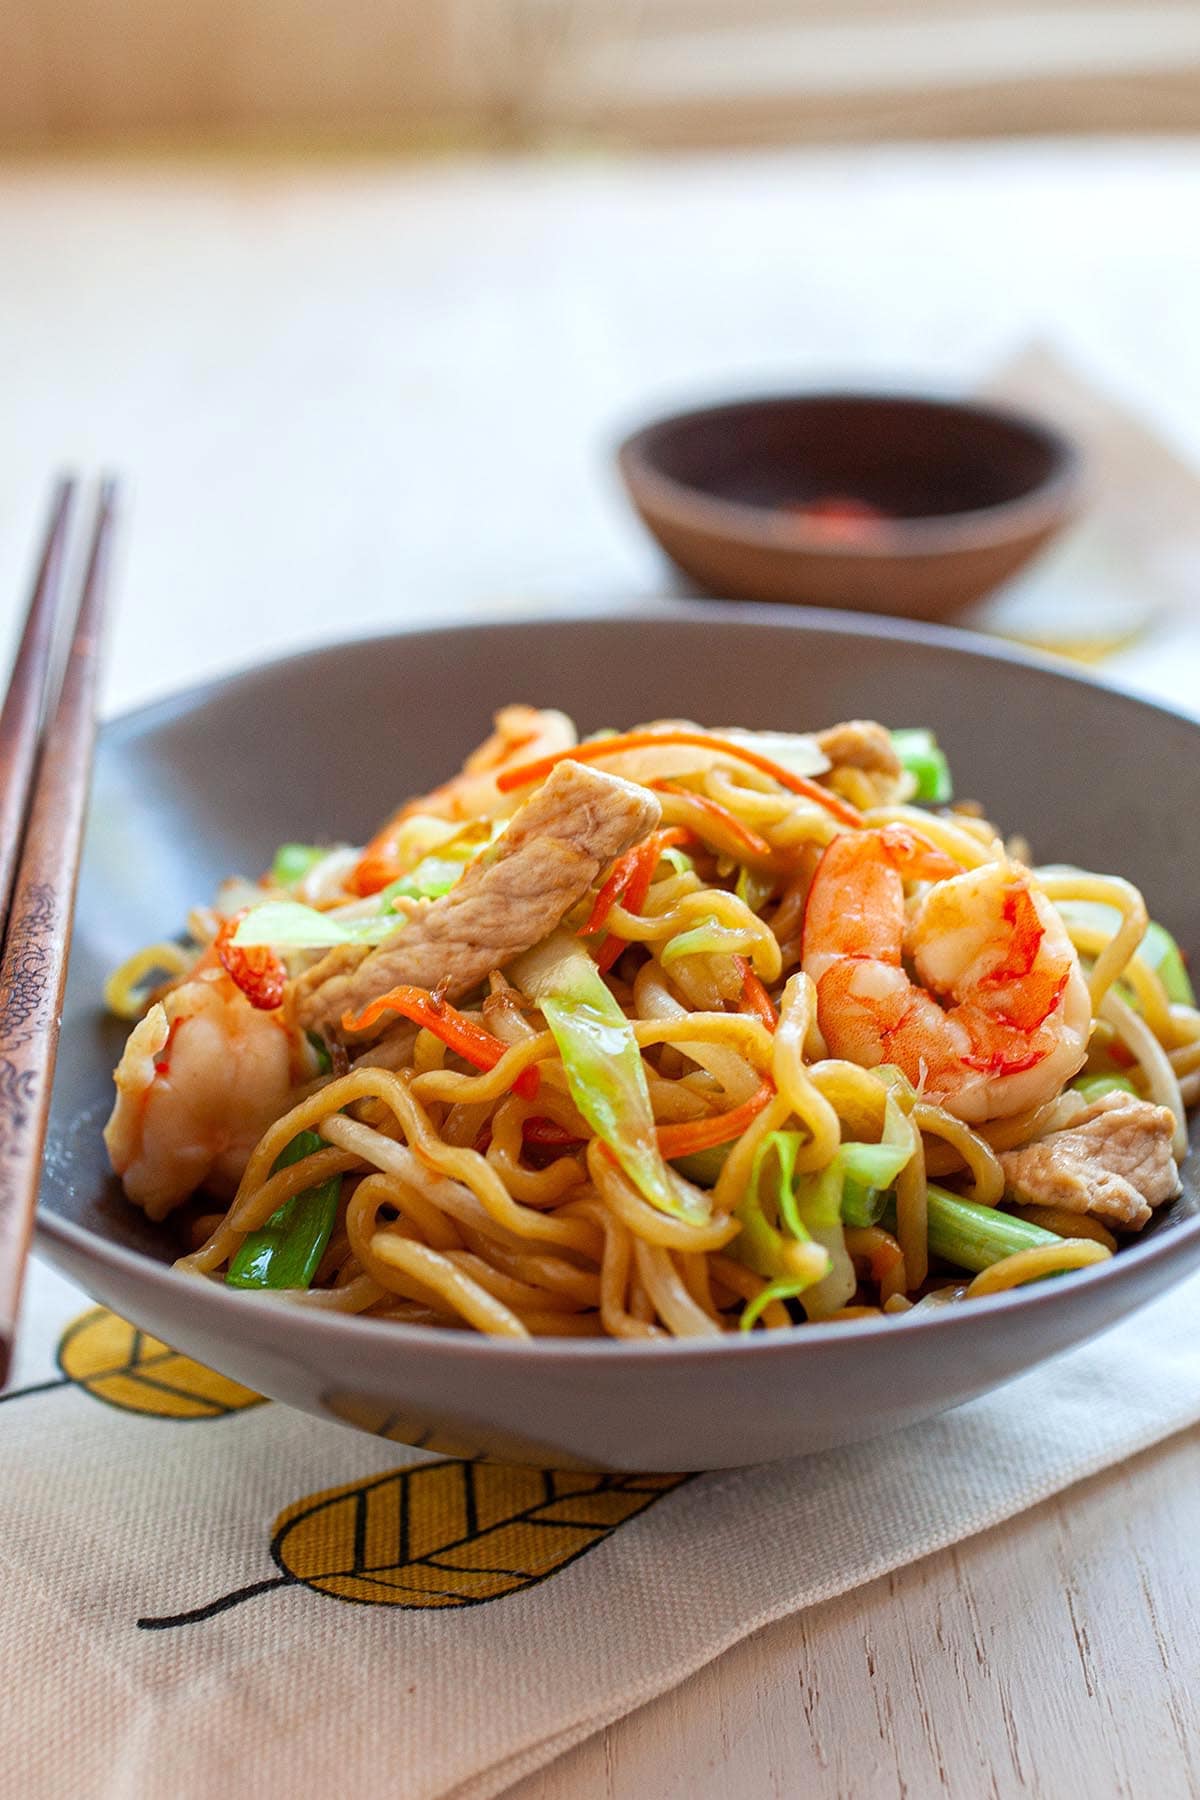 Chow mein recipe with chow mein noodles, vegetables and pork.